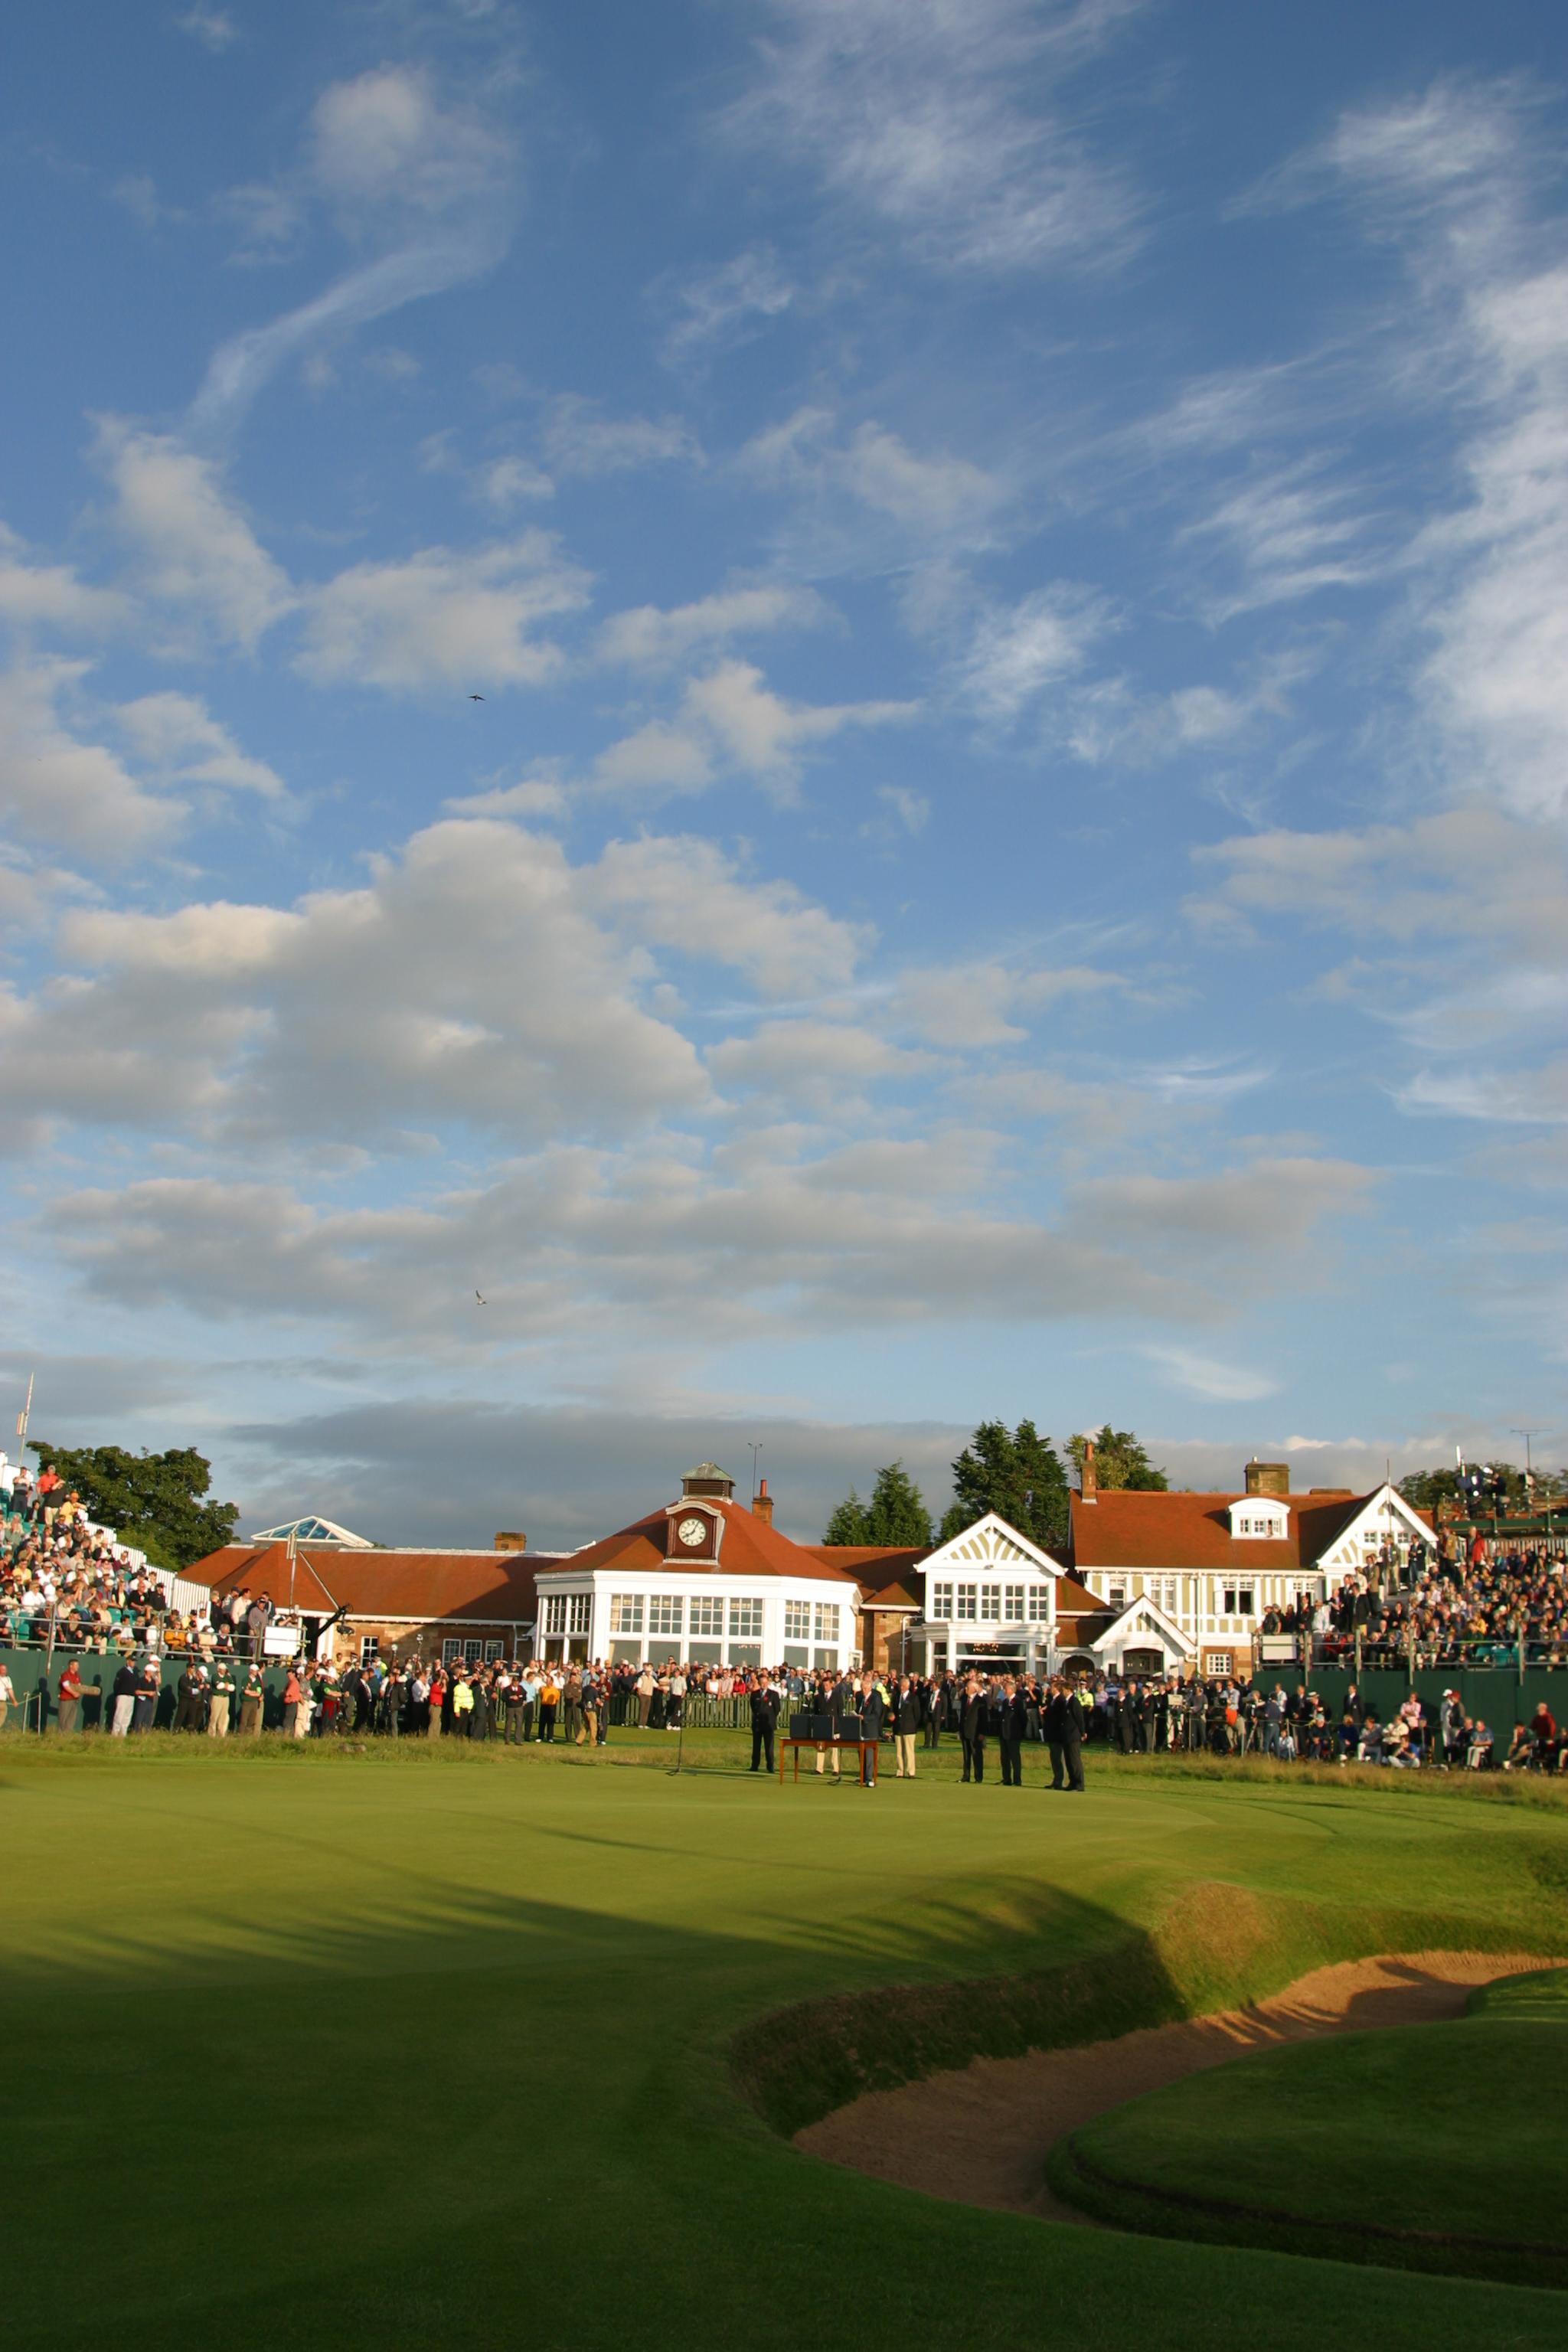 The Open Championship to be held at Muirfield next month